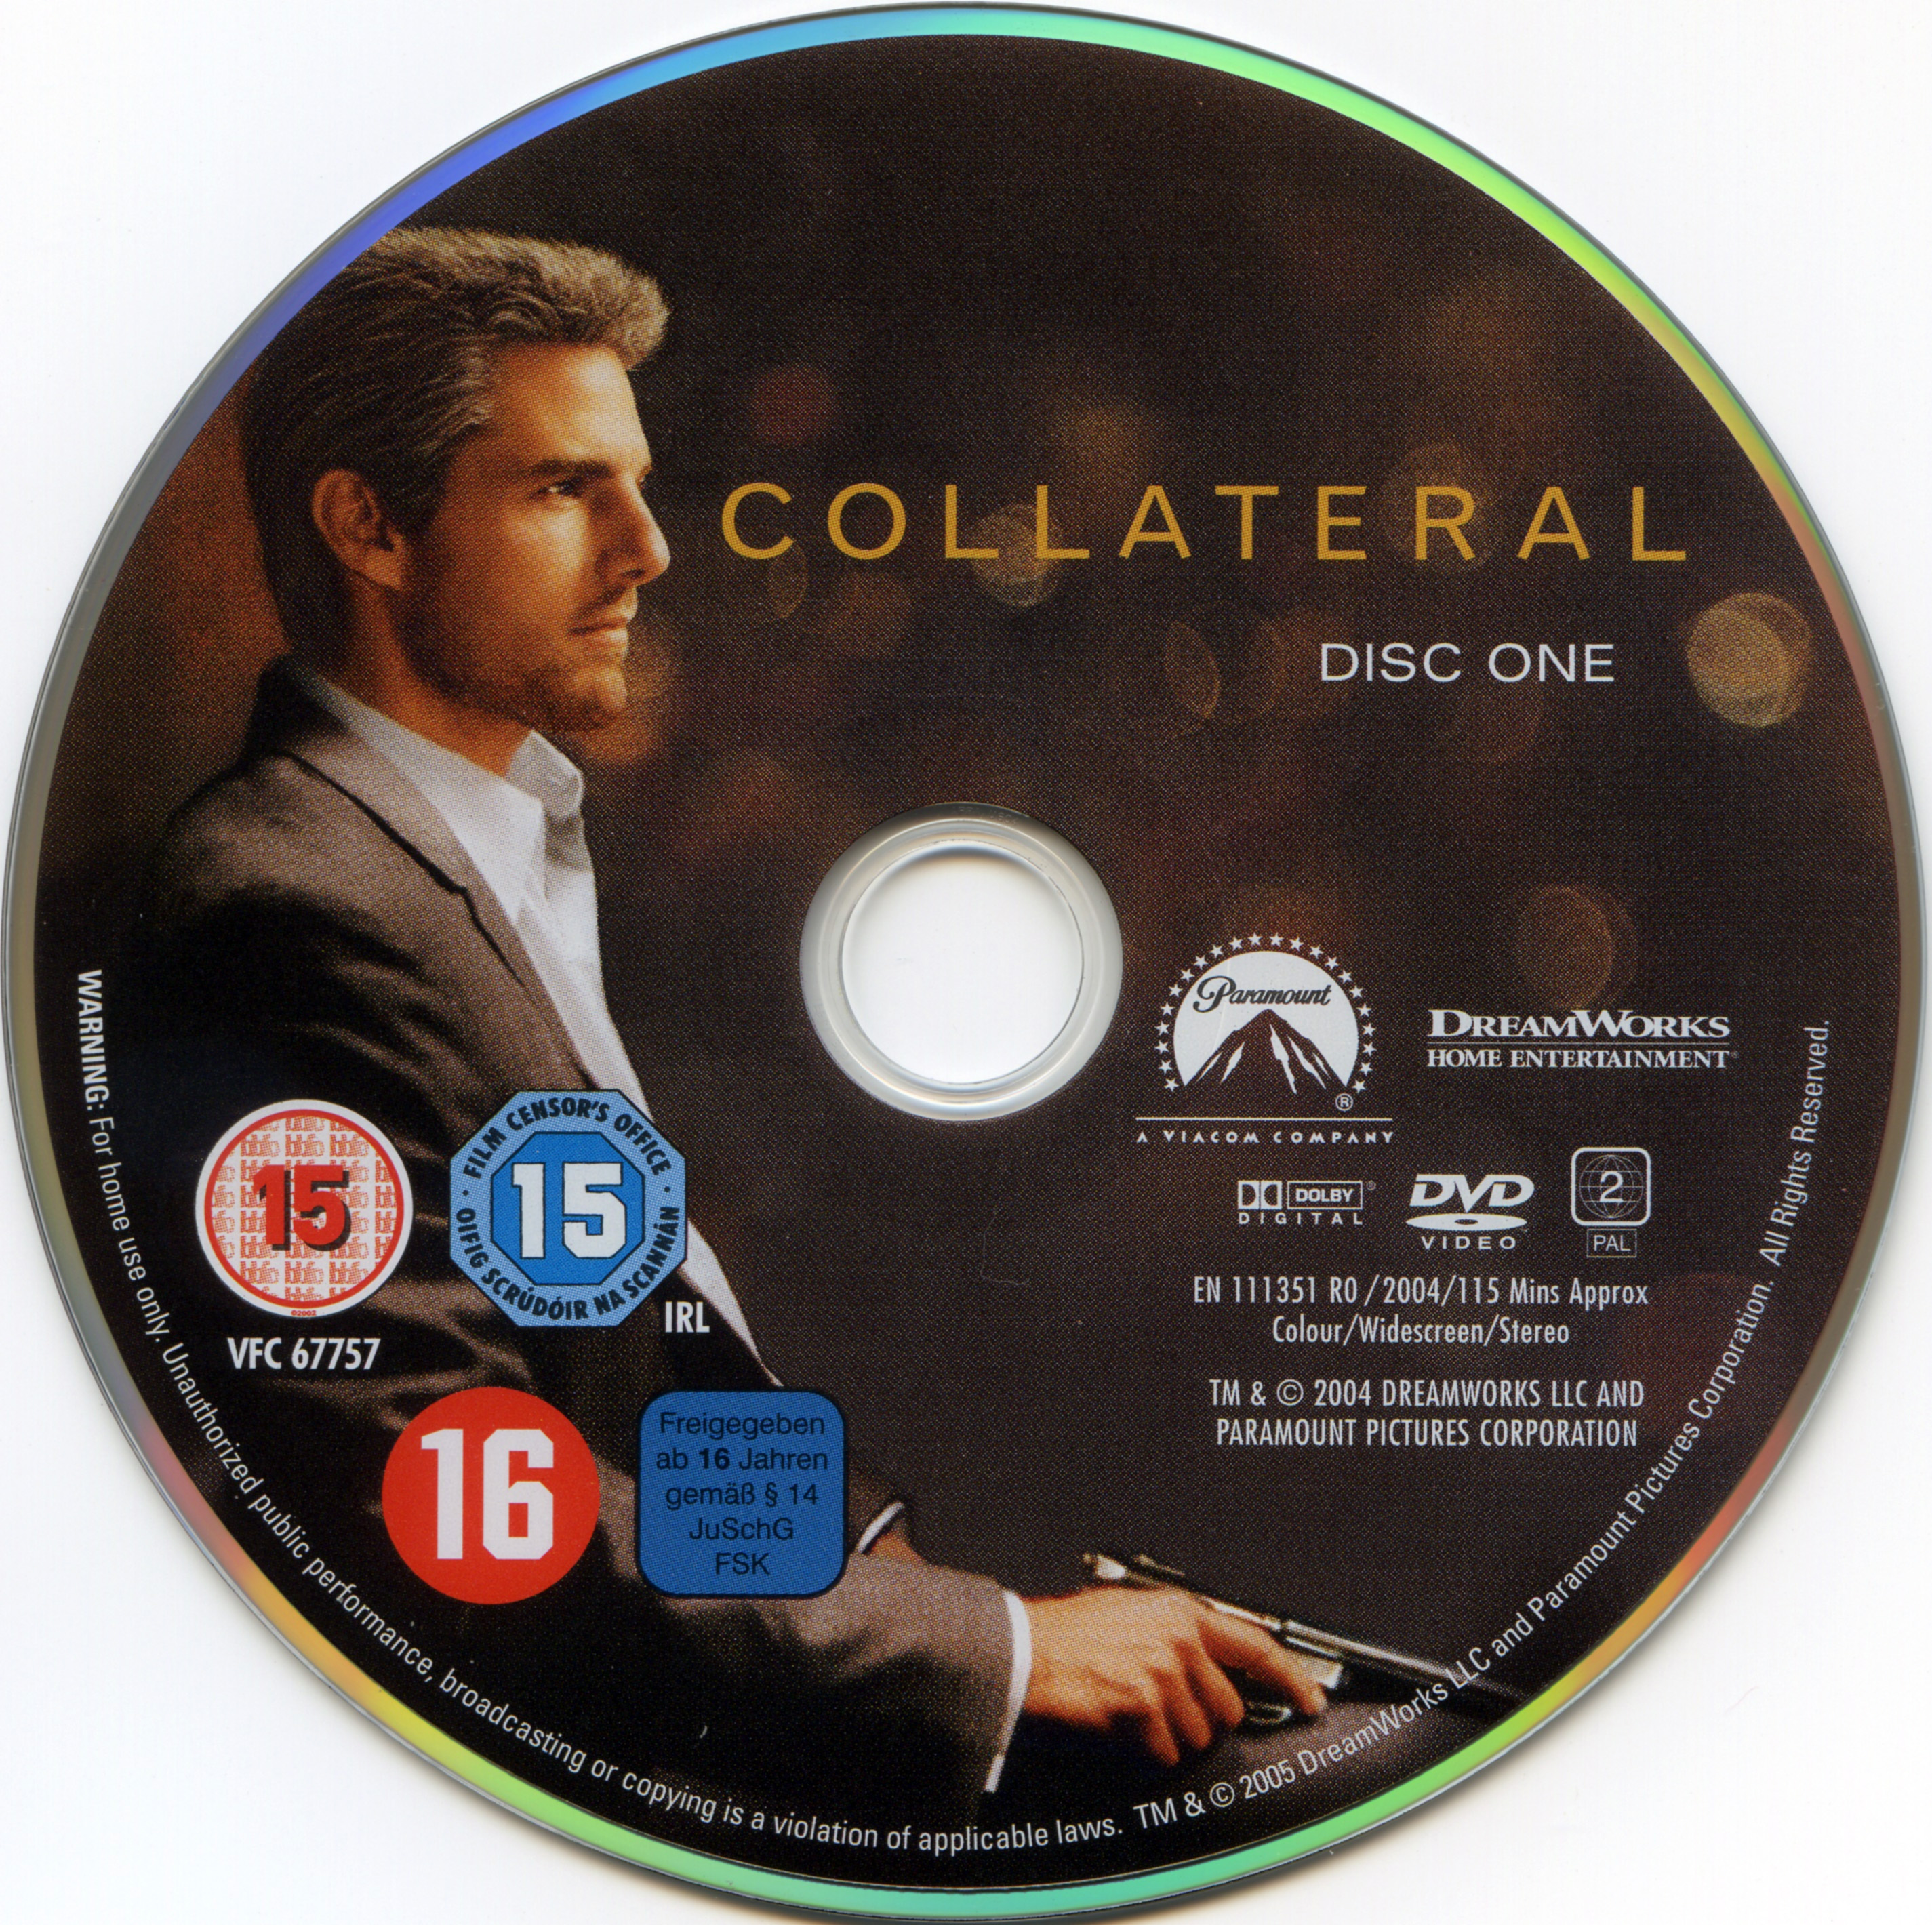 Collateral DISC 1